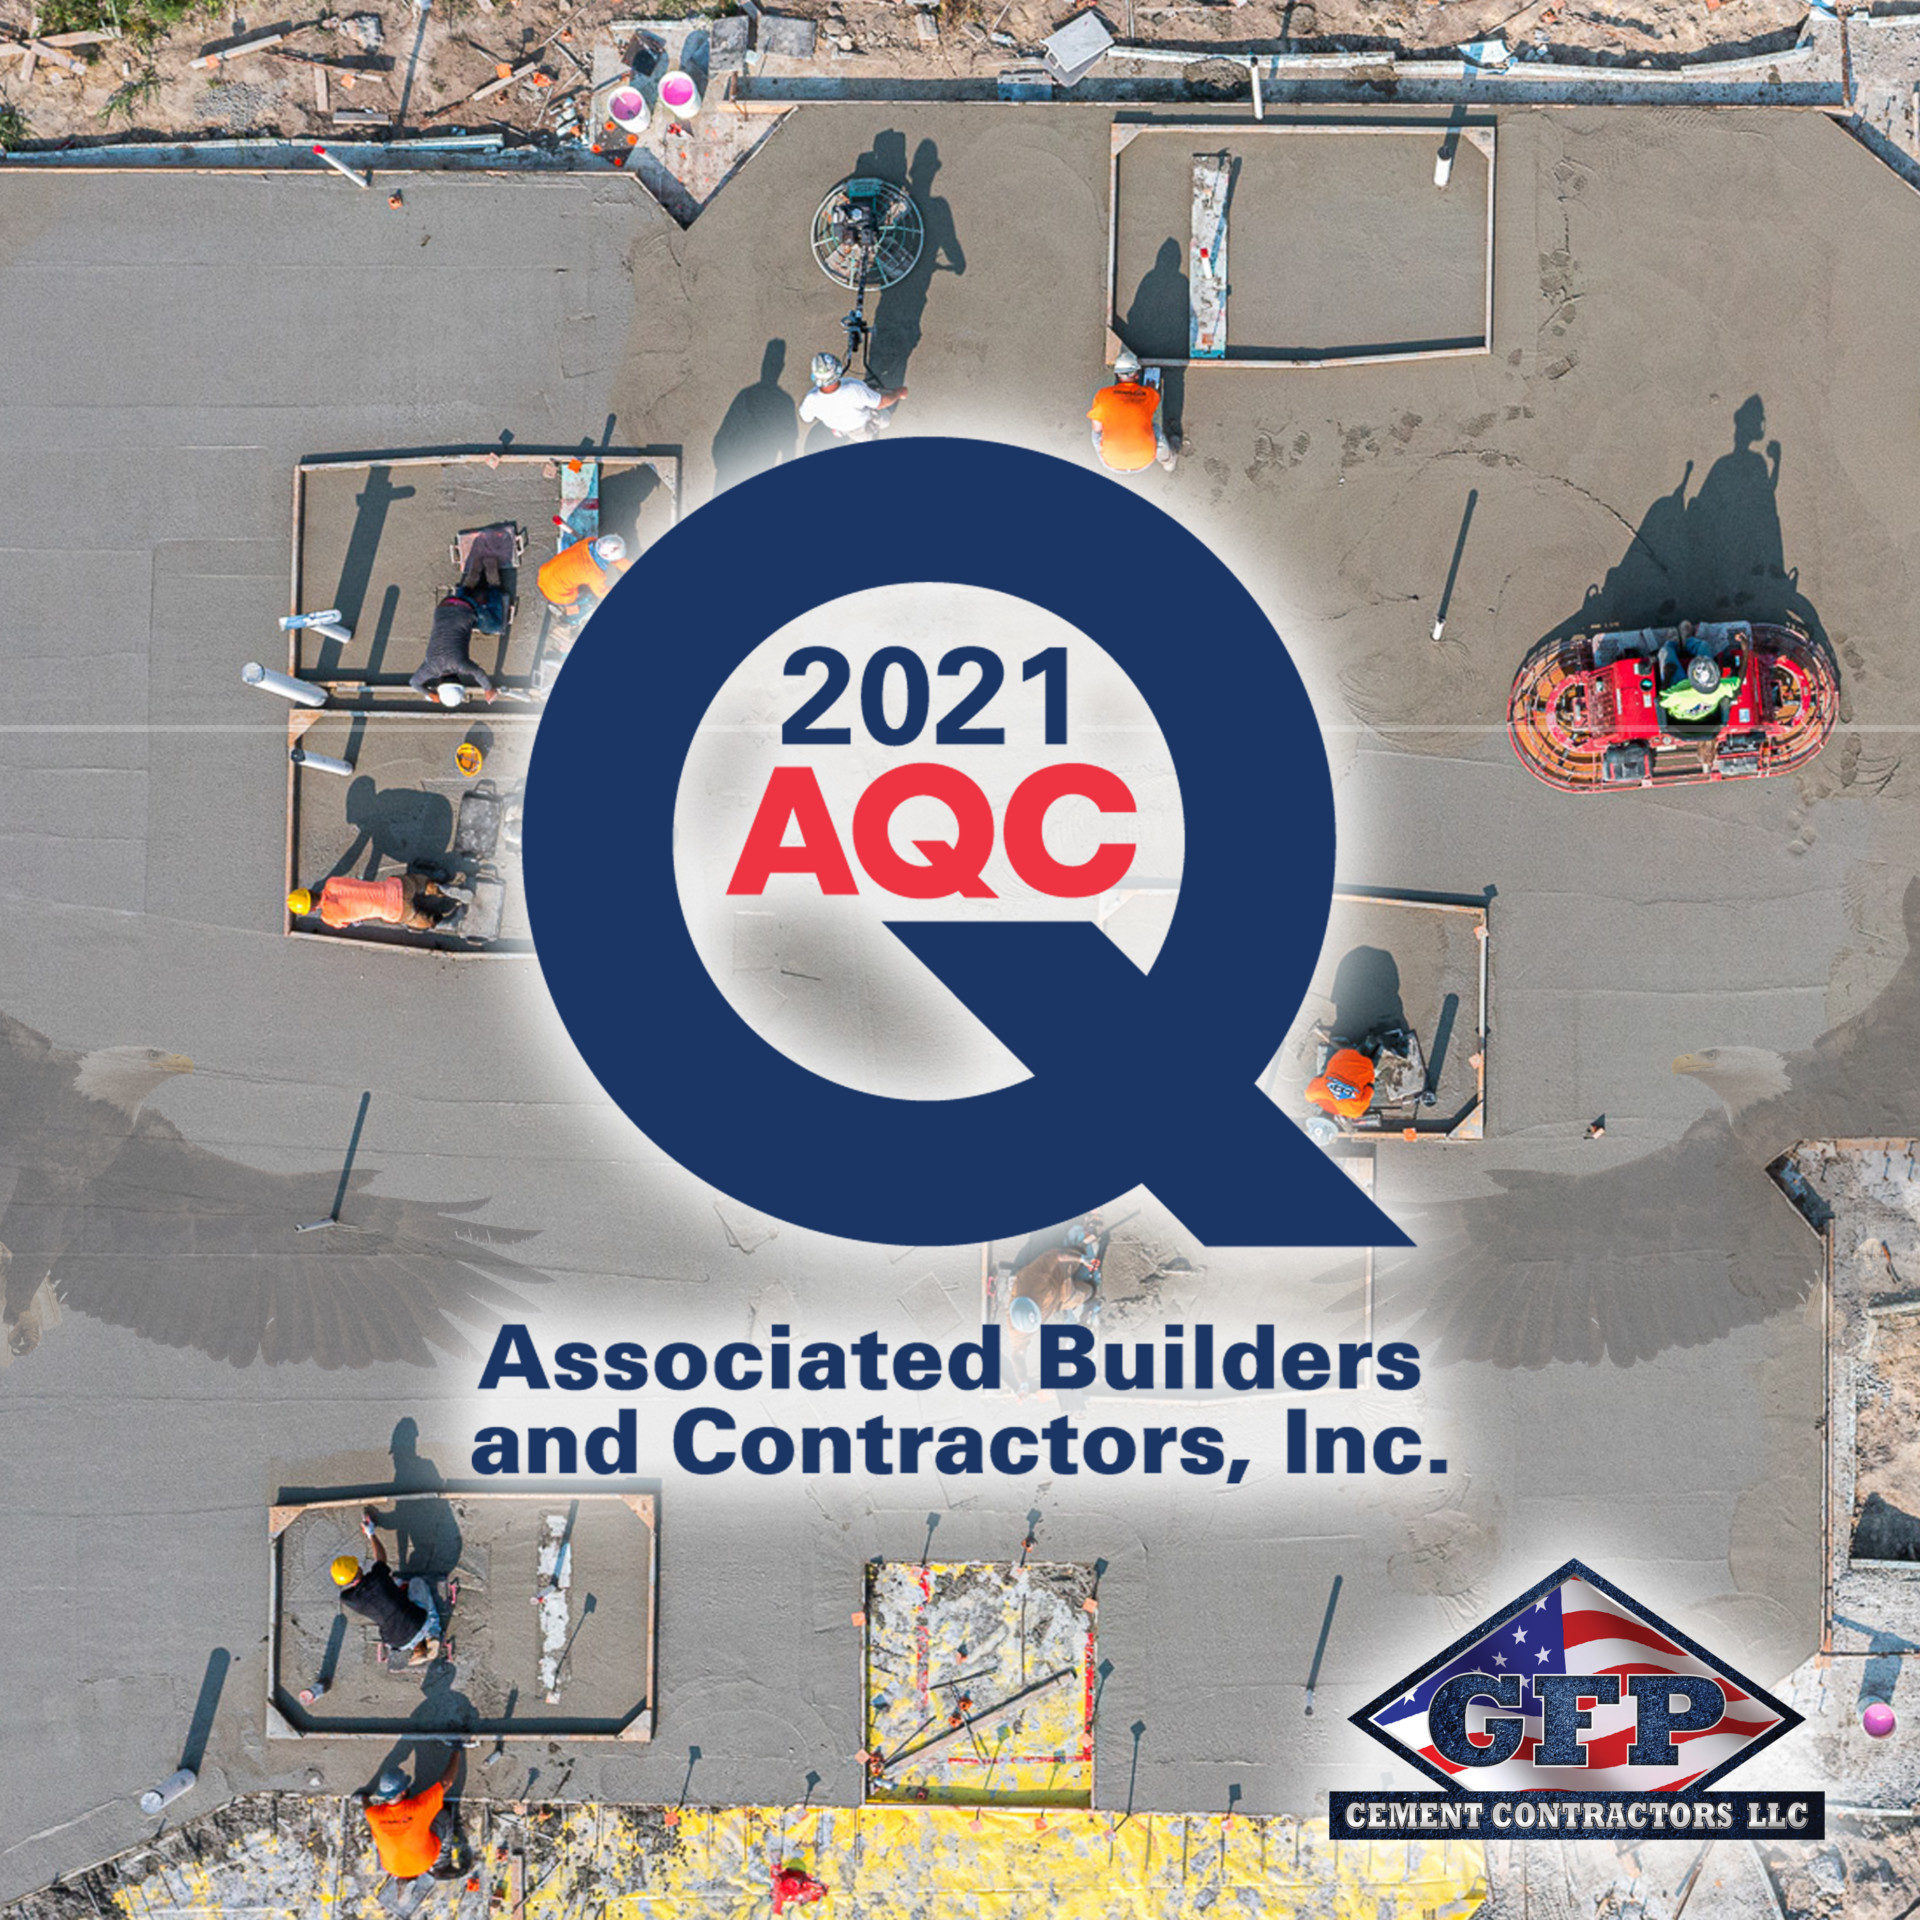 GFP Cement Contractors, LLC Named Accredited Quality Contractor by ABC, Achieving Elite Status in Safety, Education and Culture